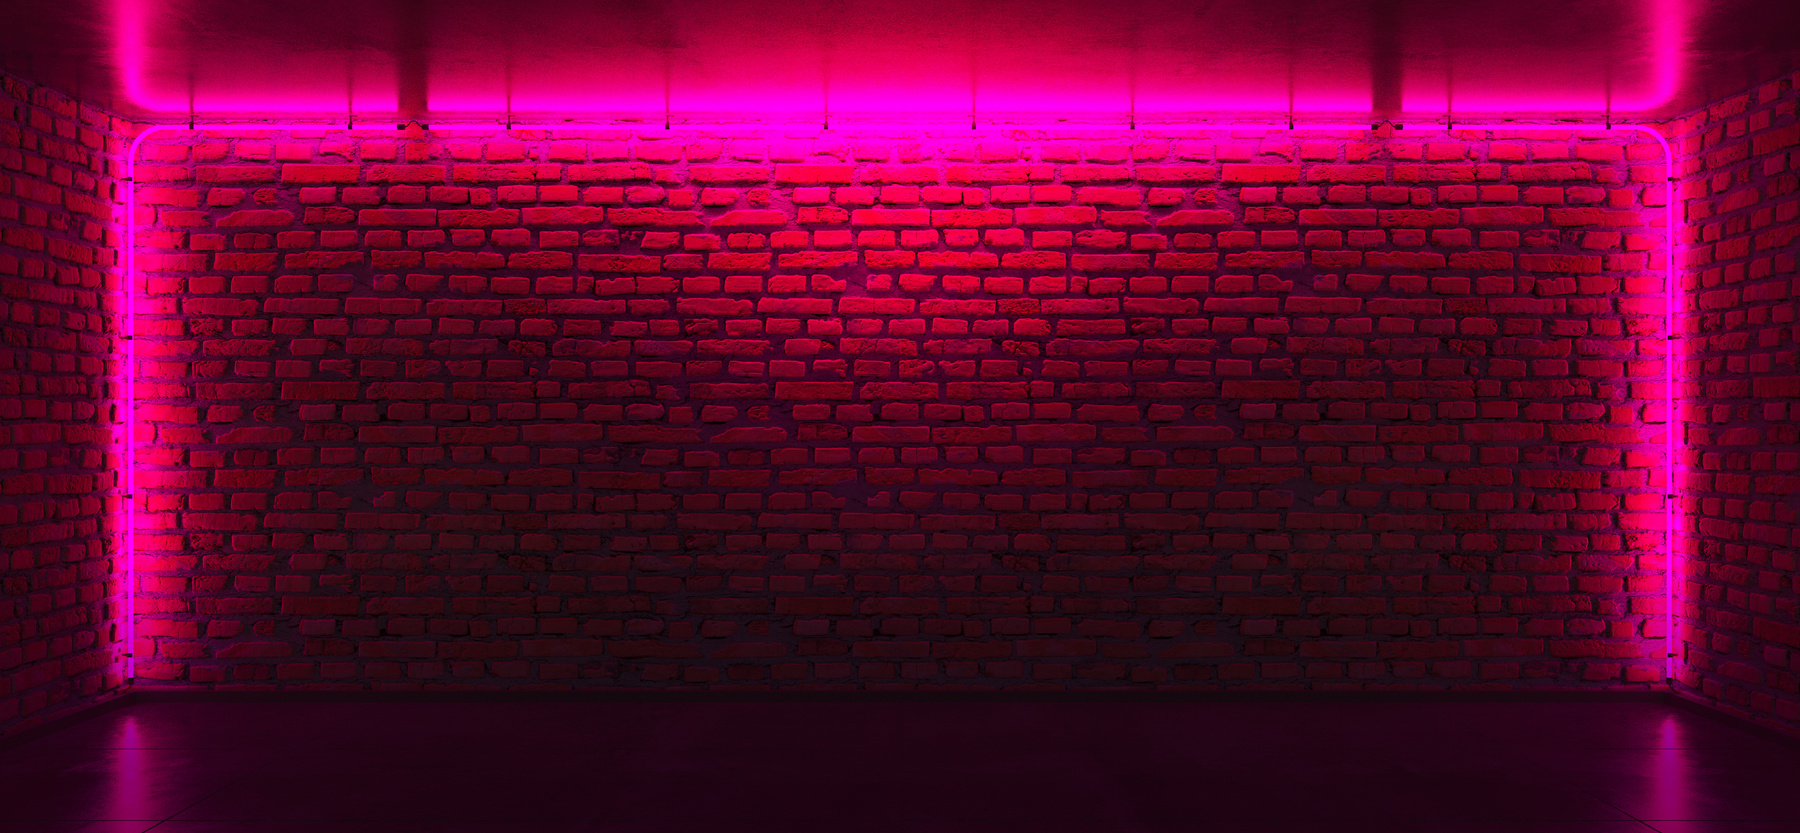 Brick Wall Background with Neon Light